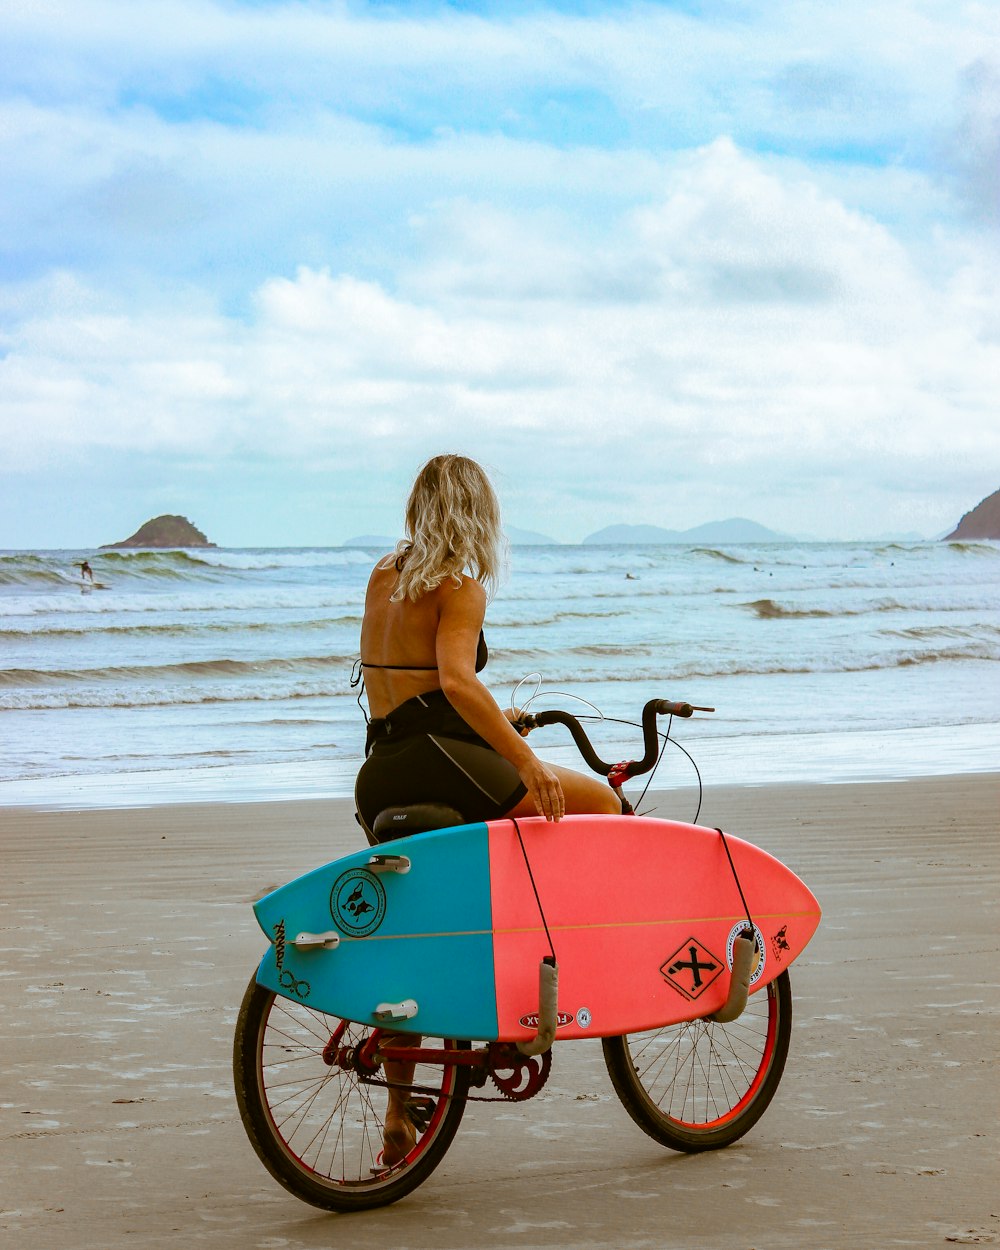 woman in black tank top riding on red and blue bicycle on beach during daytime